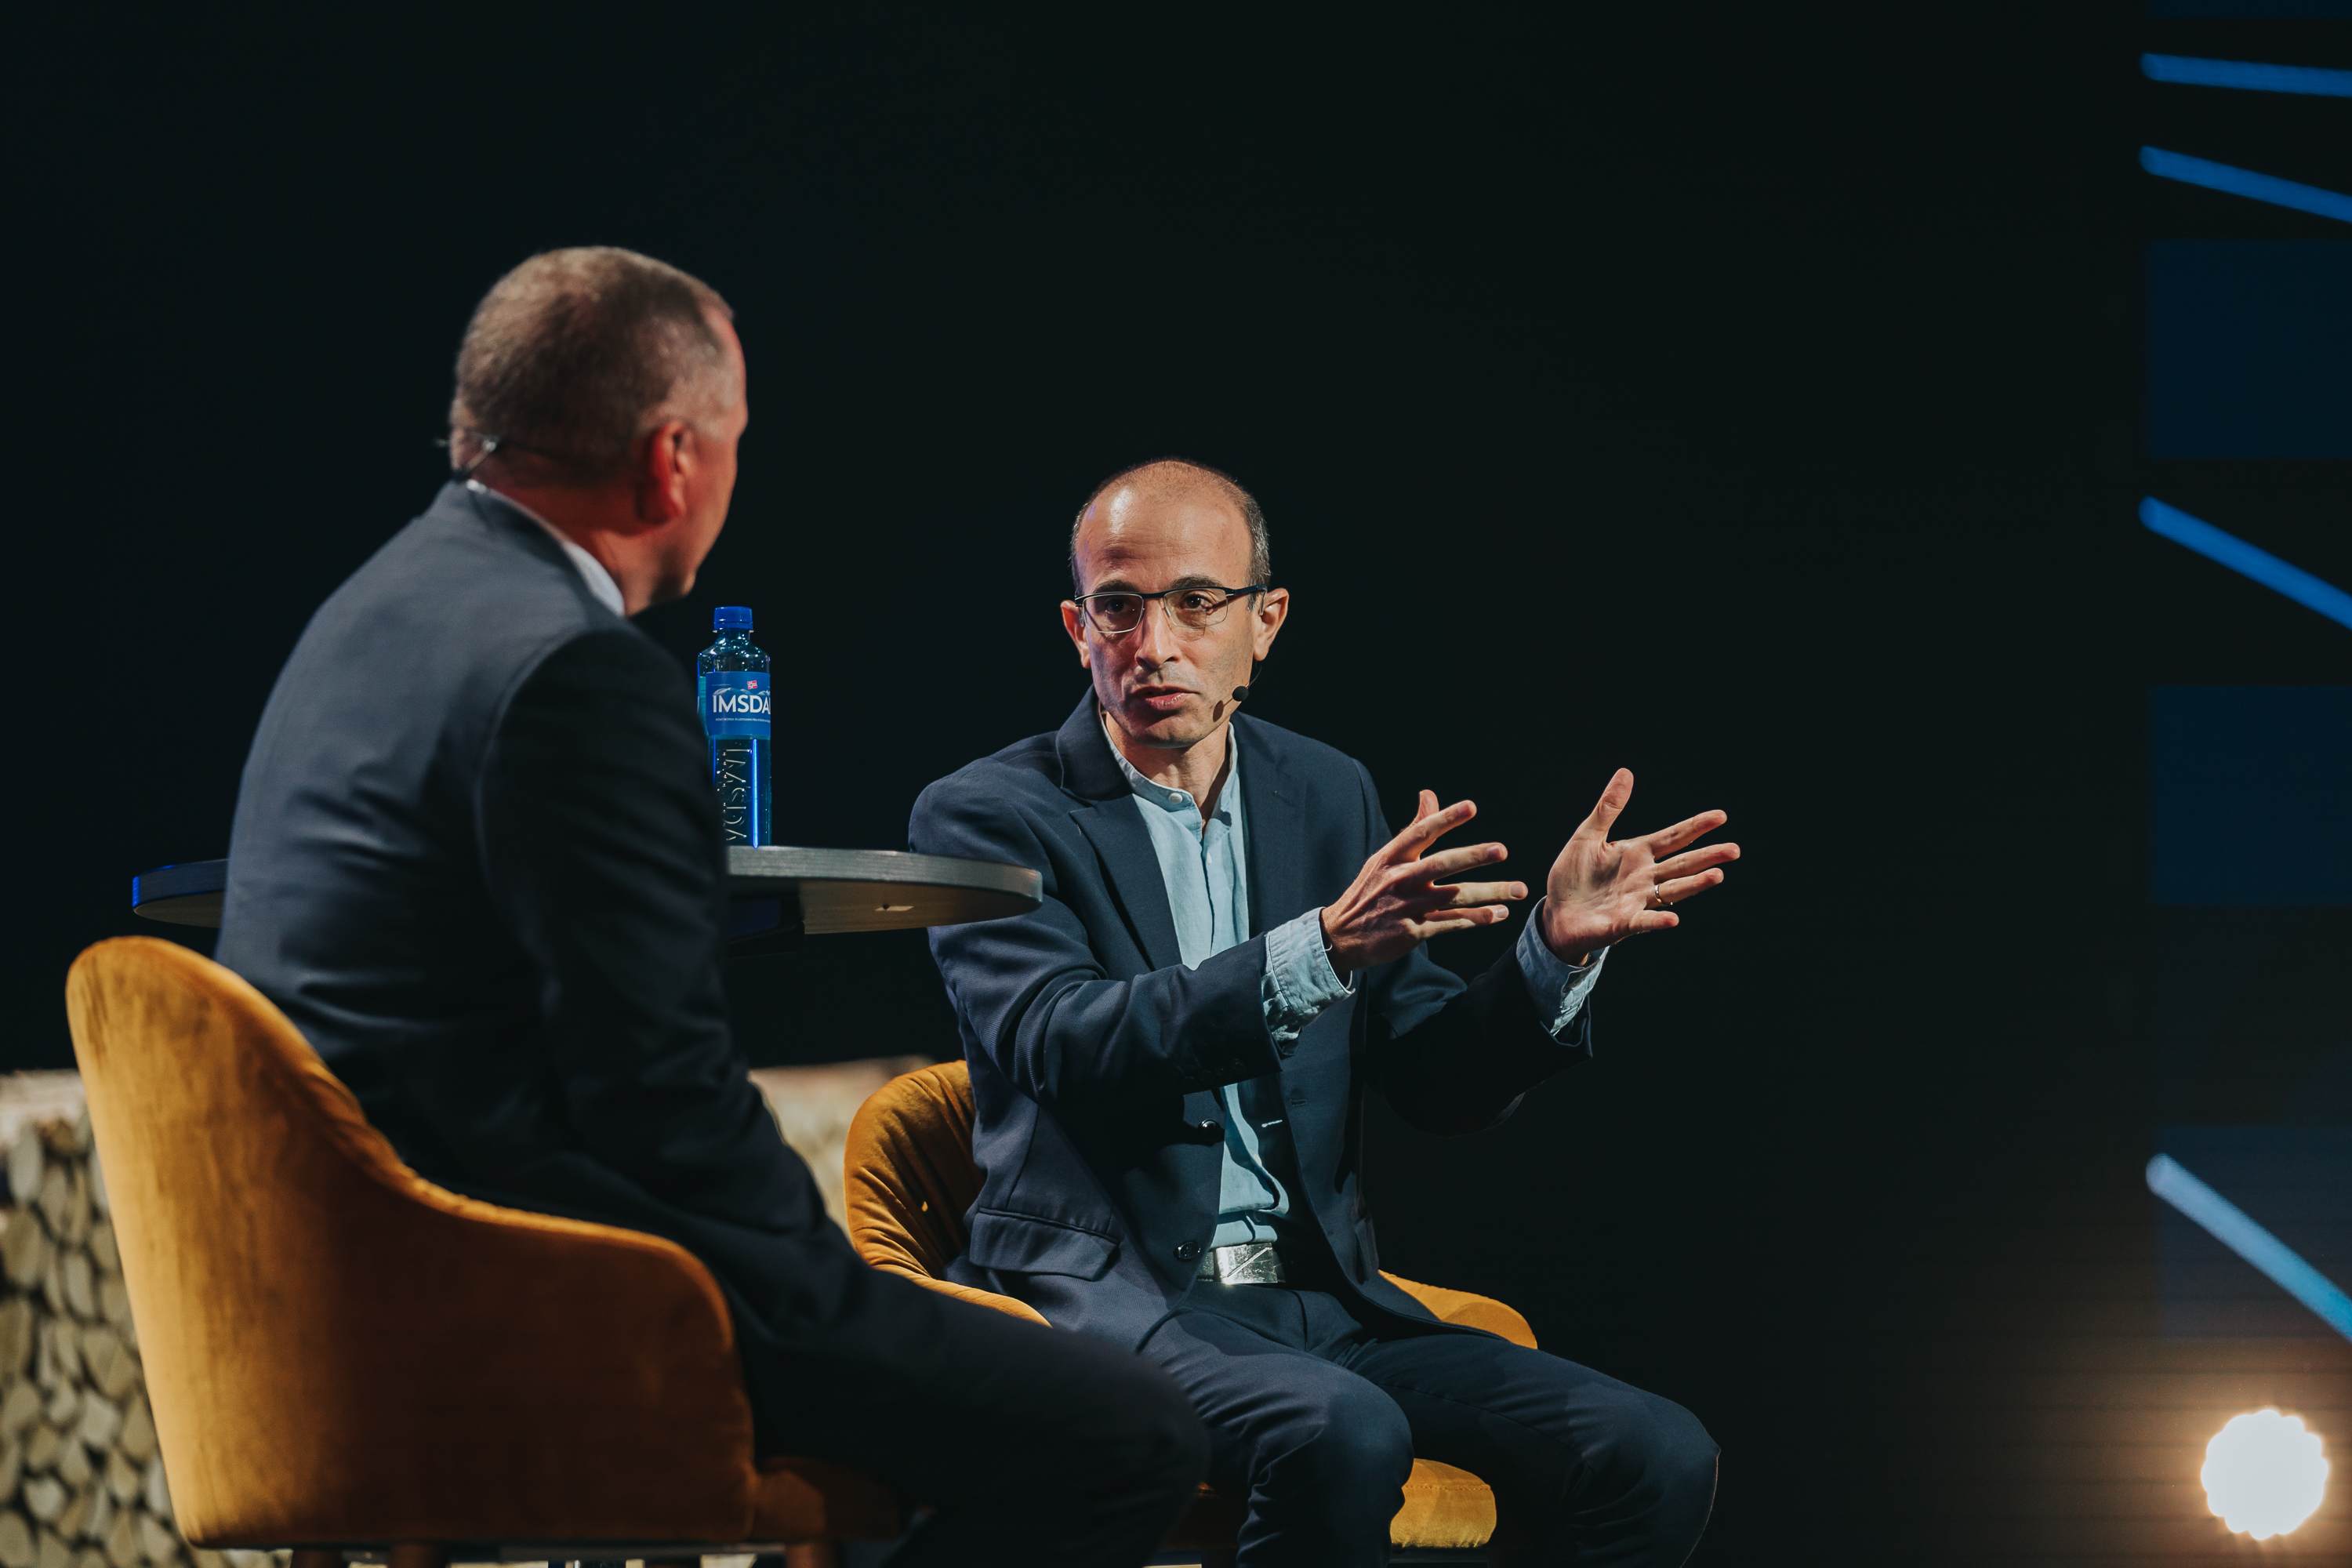 Yuval Noah Harari: The Most Important Skills for the Future of Work